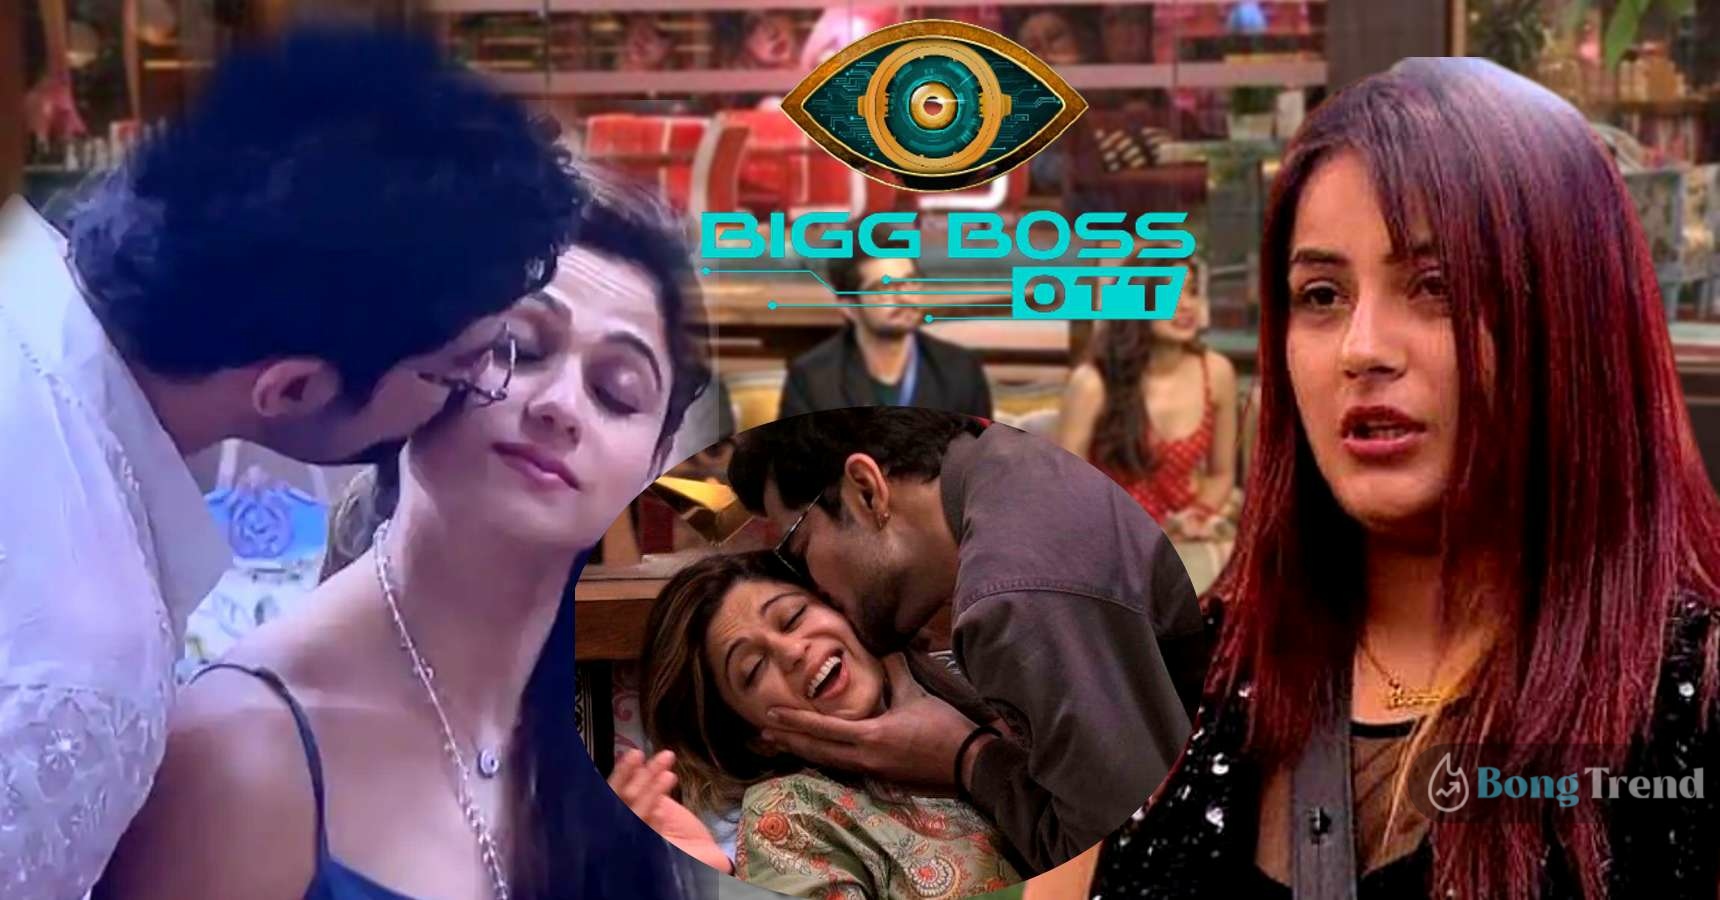 Bigboss top secrets that most viewers don't know